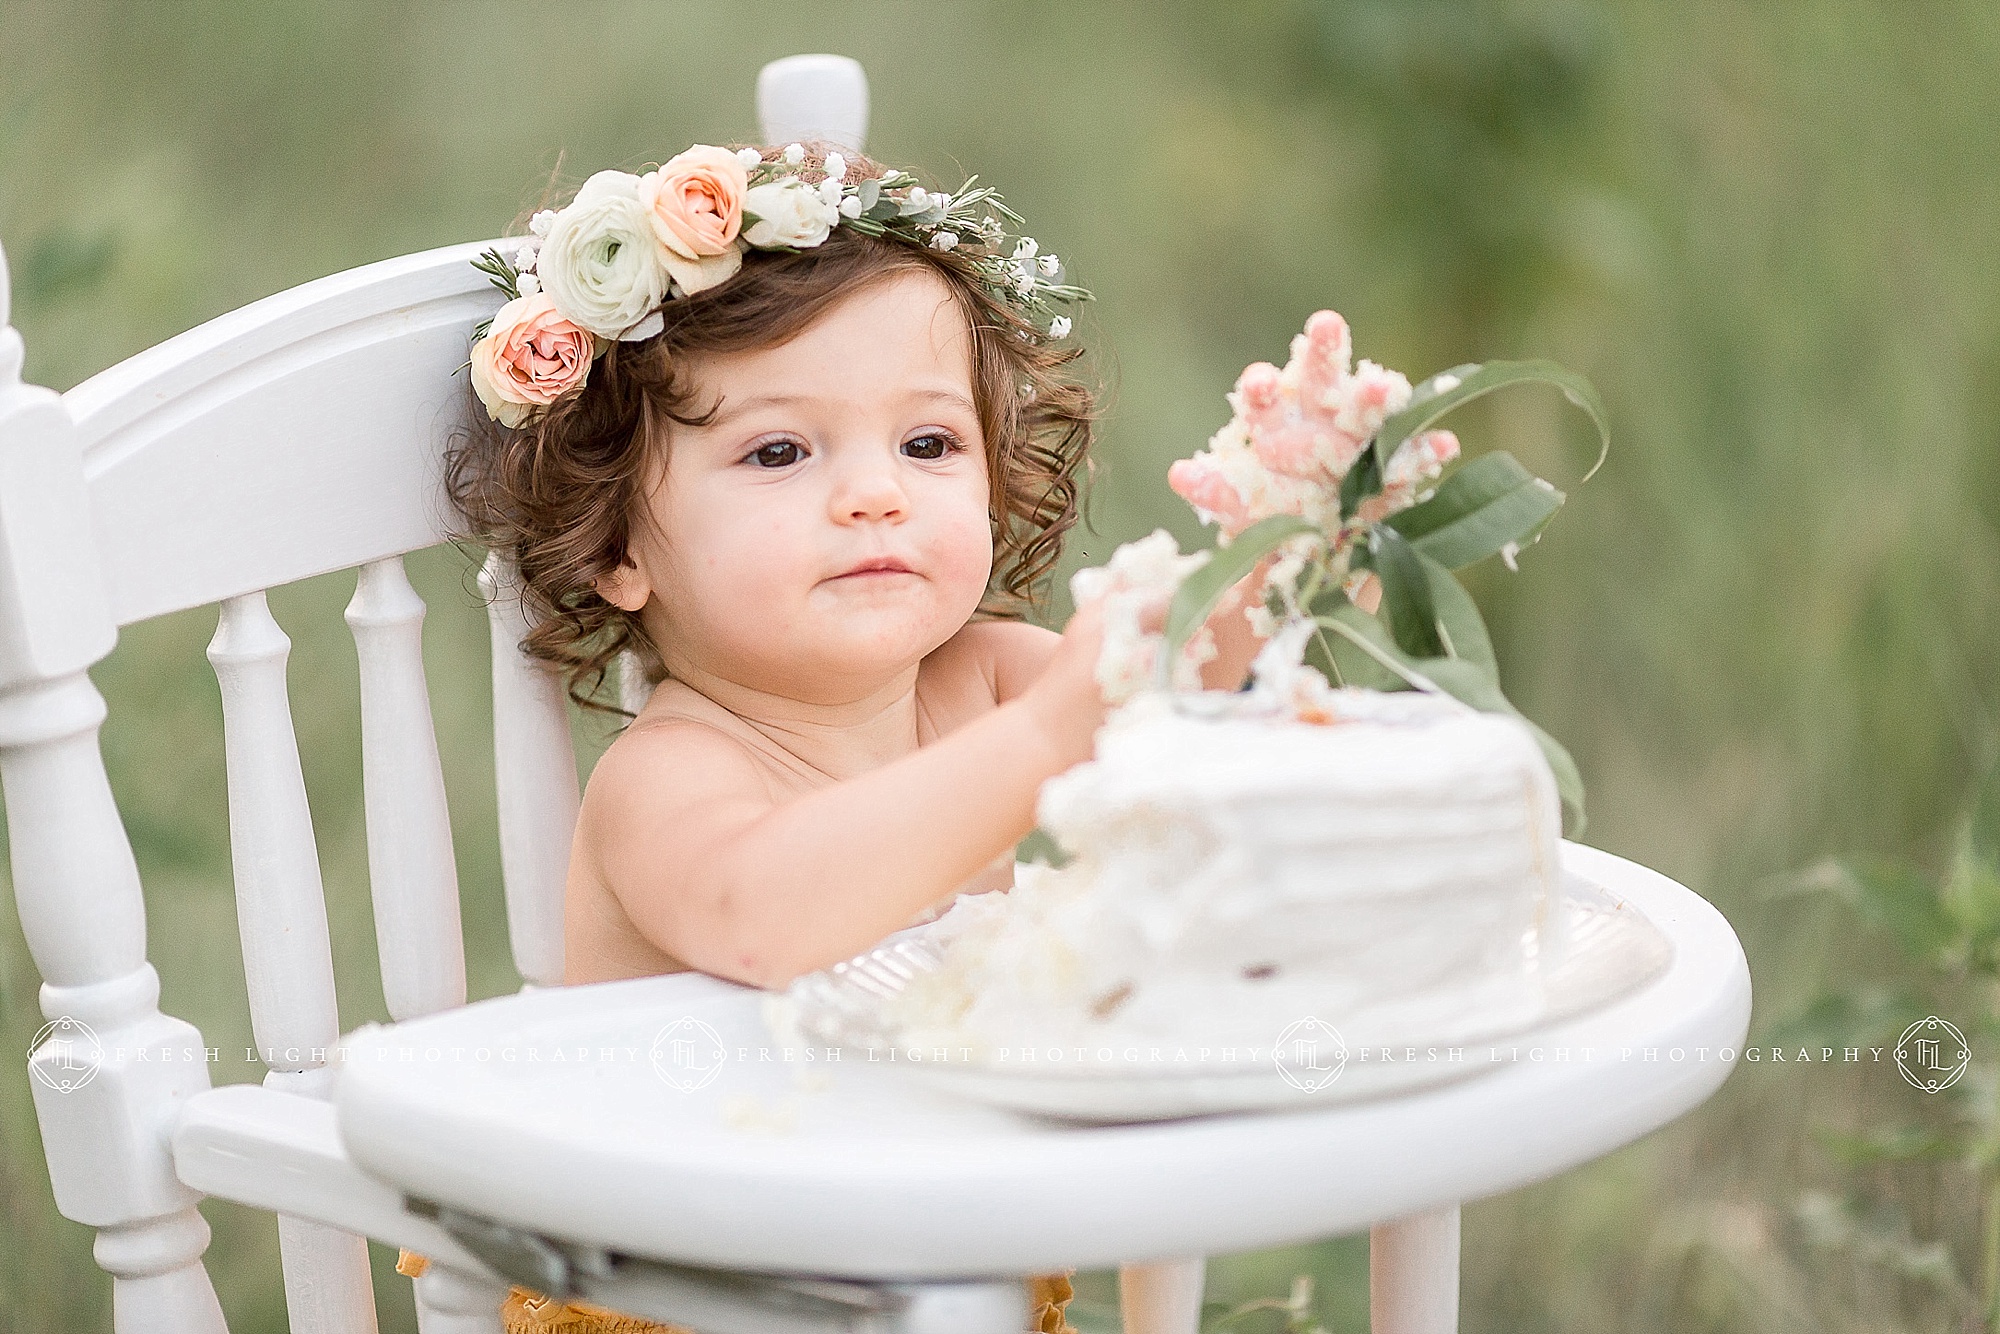 Baby in high chair eating cake